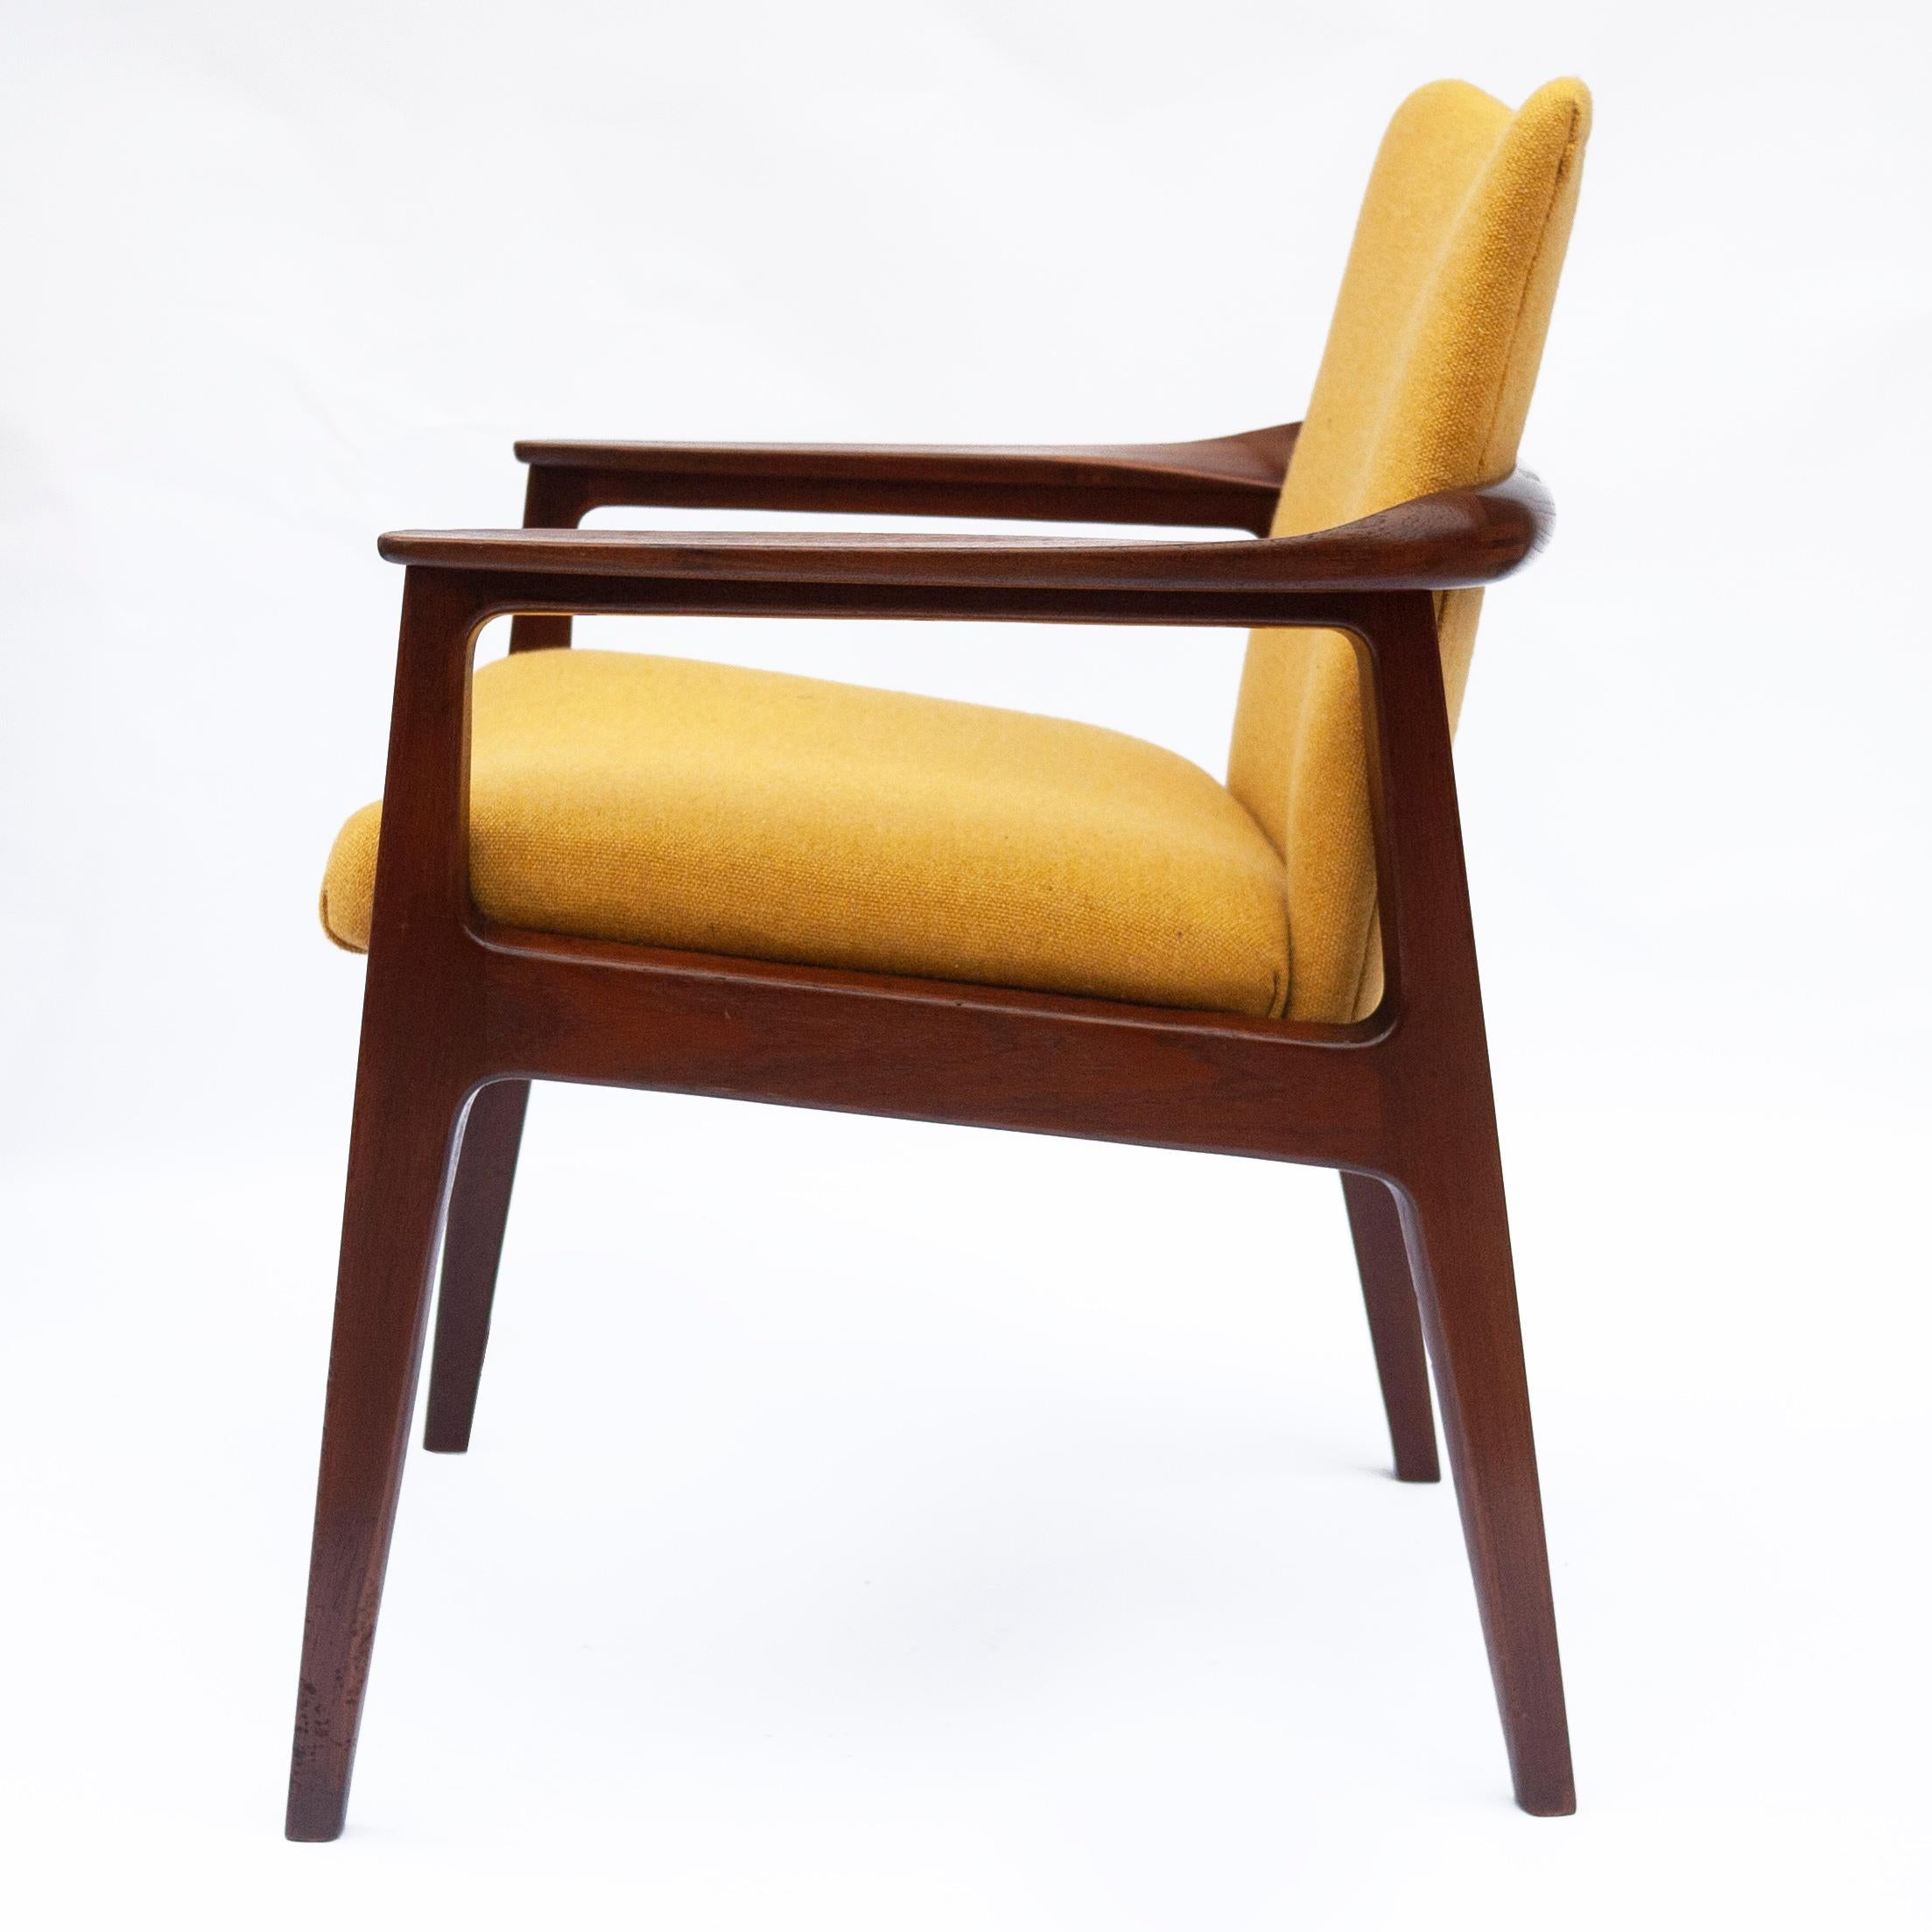 Mid-Century Teak Armchair with Yellow Upholstery by Sigvard Bernadotte 6